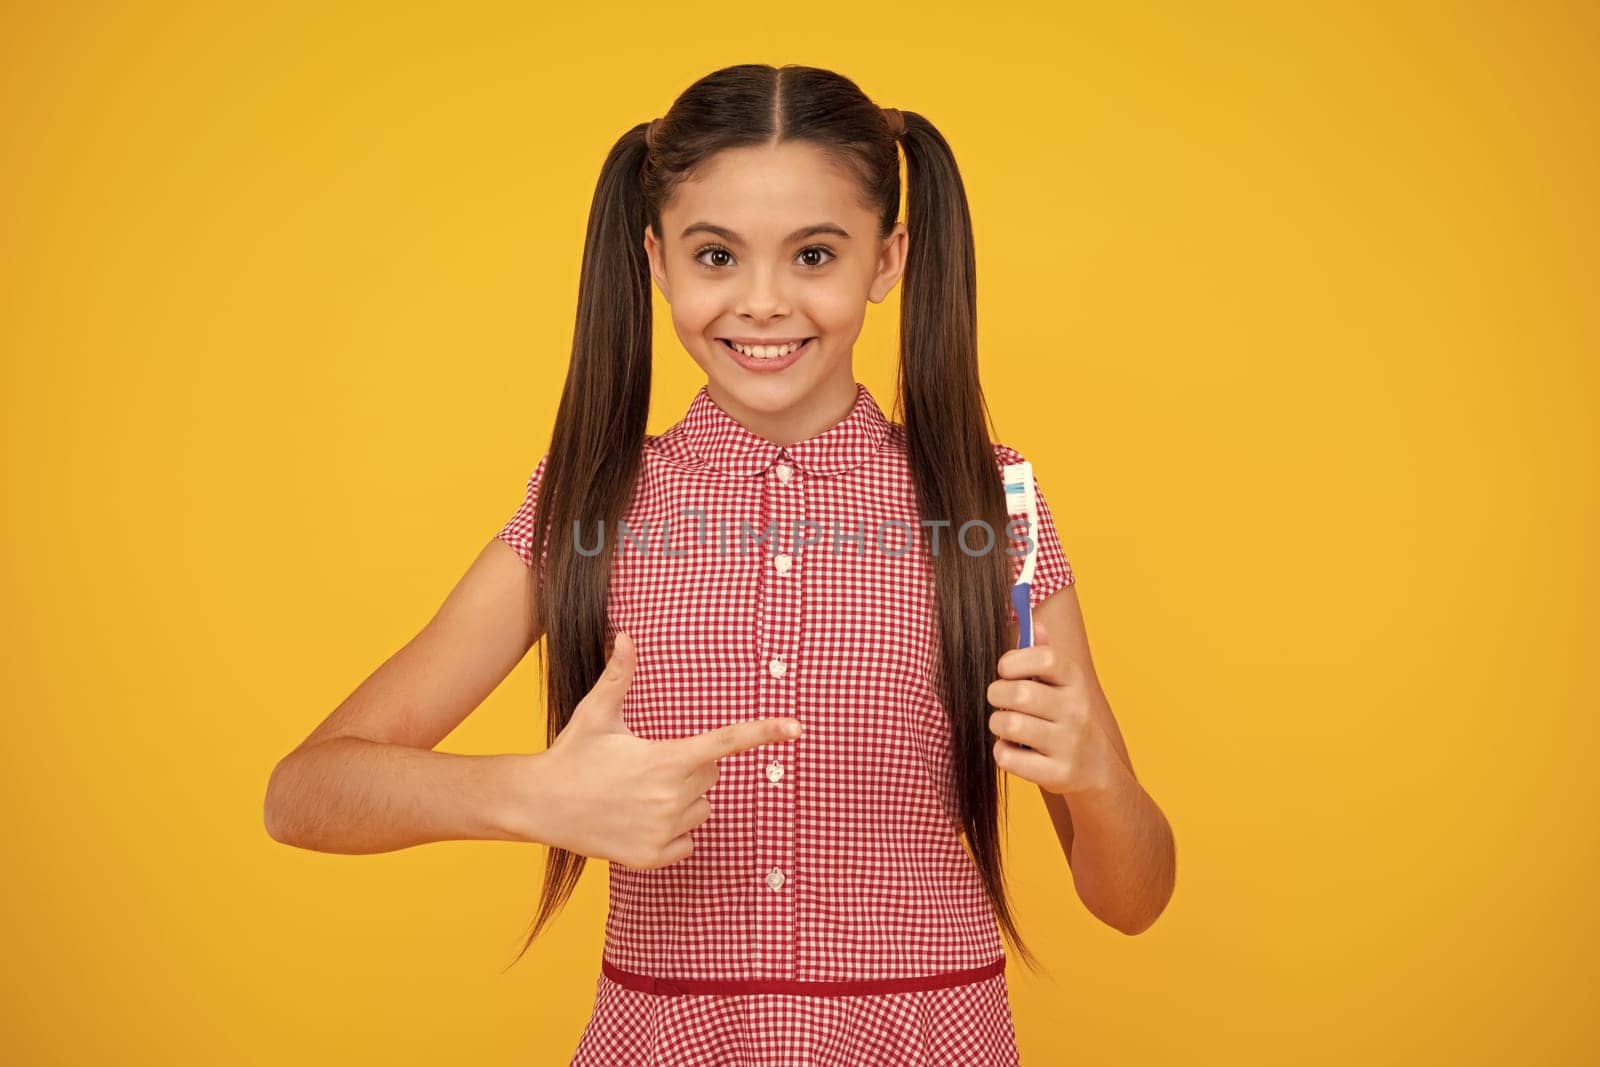 Girl cleans her teeth with a brush. Portrait beautiful teen holding toothbrush brushing teeth isolated on yellow background, Dental health concept. Happy teenager, positive and smiling emotions.